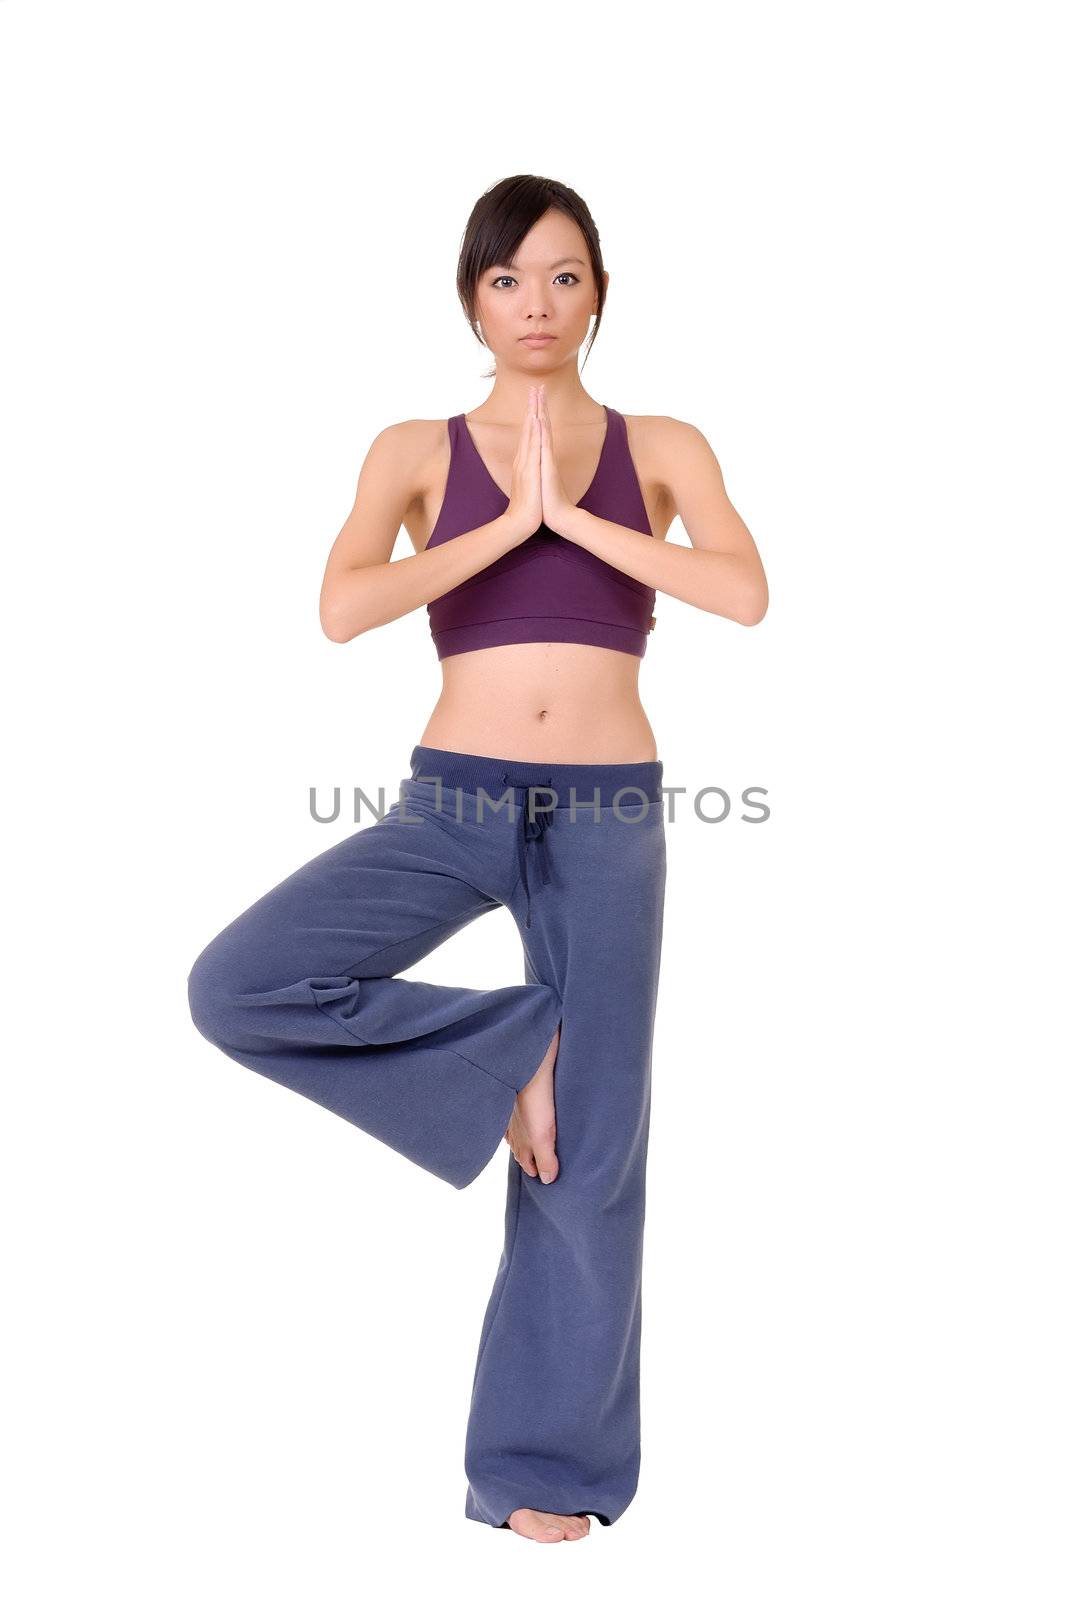 Young woman doing yoga excise by standing on one foot isolated over white.